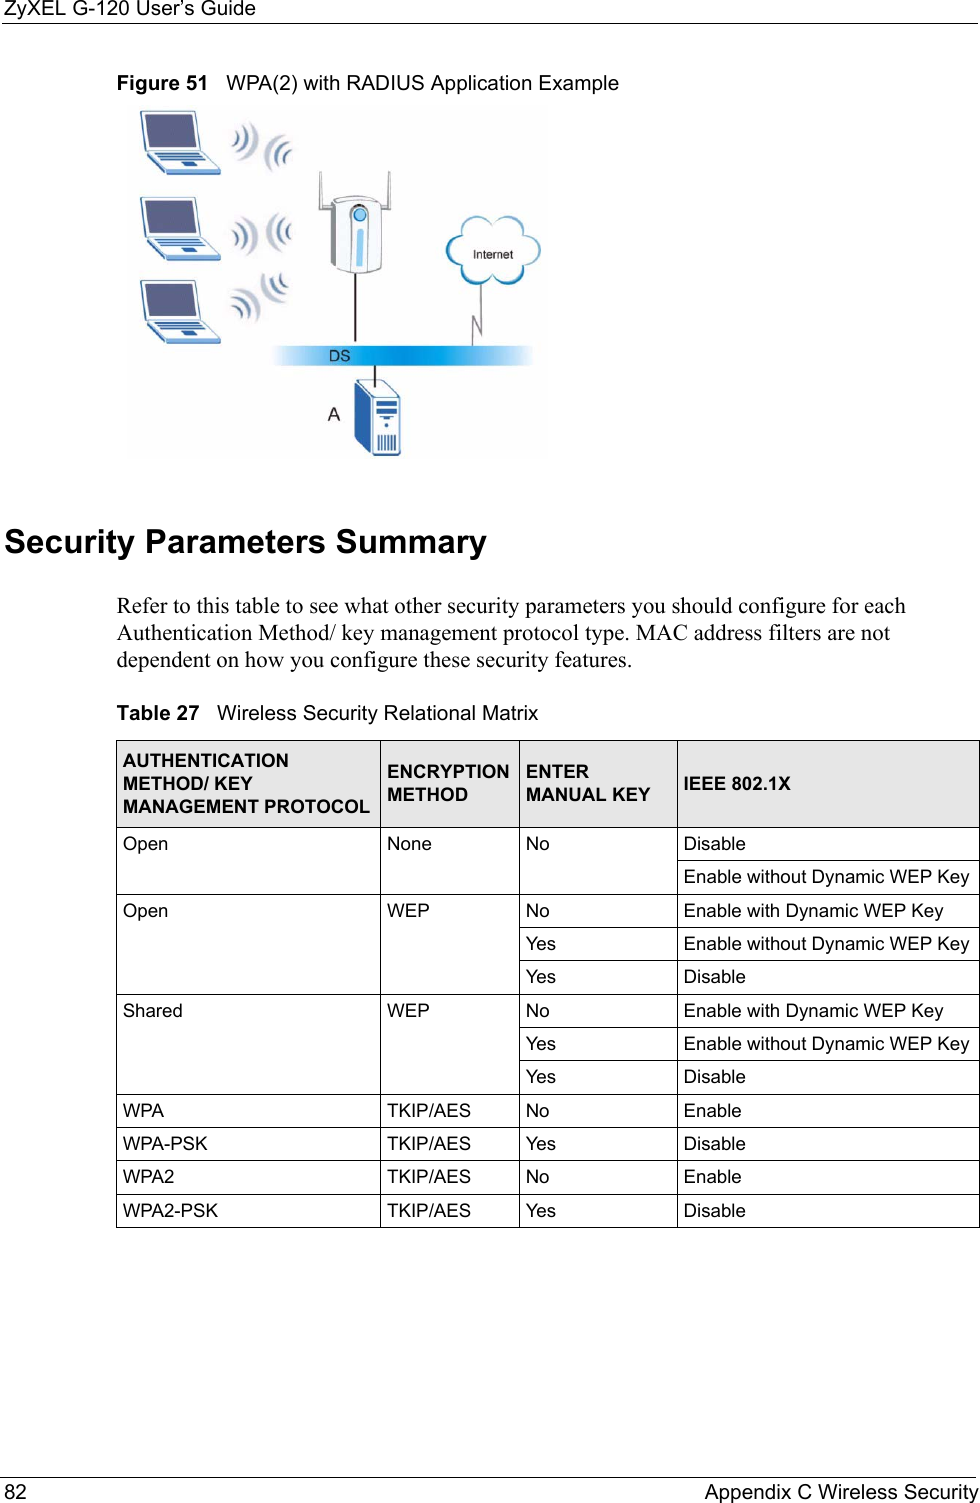 ZyXEL G-120 User’s Guide82 Appendix C Wireless SecurityFigure 51   WPA(2) with RADIUS Application ExampleSecurity Parameters SummaryRefer to this table to see what other security parameters you should configure for each Authentication Method/ key management protocol type. MAC address filters are not dependent on how you configure these security features.Table 27   Wireless Security Relational MatrixAUTHENTICATION METHOD/ KEY MANAGEMENT PROTOCOLENCRYPTION METHODENTER MANUAL KEY IEEE 802.1XOpen None No DisableEnable without Dynamic WEP KeyOpen WEP No           Enable with Dynamic WEP KeyYes Enable without Dynamic WEP KeyYes DisableShared WEP  No           Enable with Dynamic WEP KeyYes Enable without Dynamic WEP KeyYes DisableWPA  TKIP/AES No EnableWPA-PSK  TKIP/AES Yes DisableWPA2 TKIP/AES No EnableWPA2-PSK  TKIP/AES Yes Disable